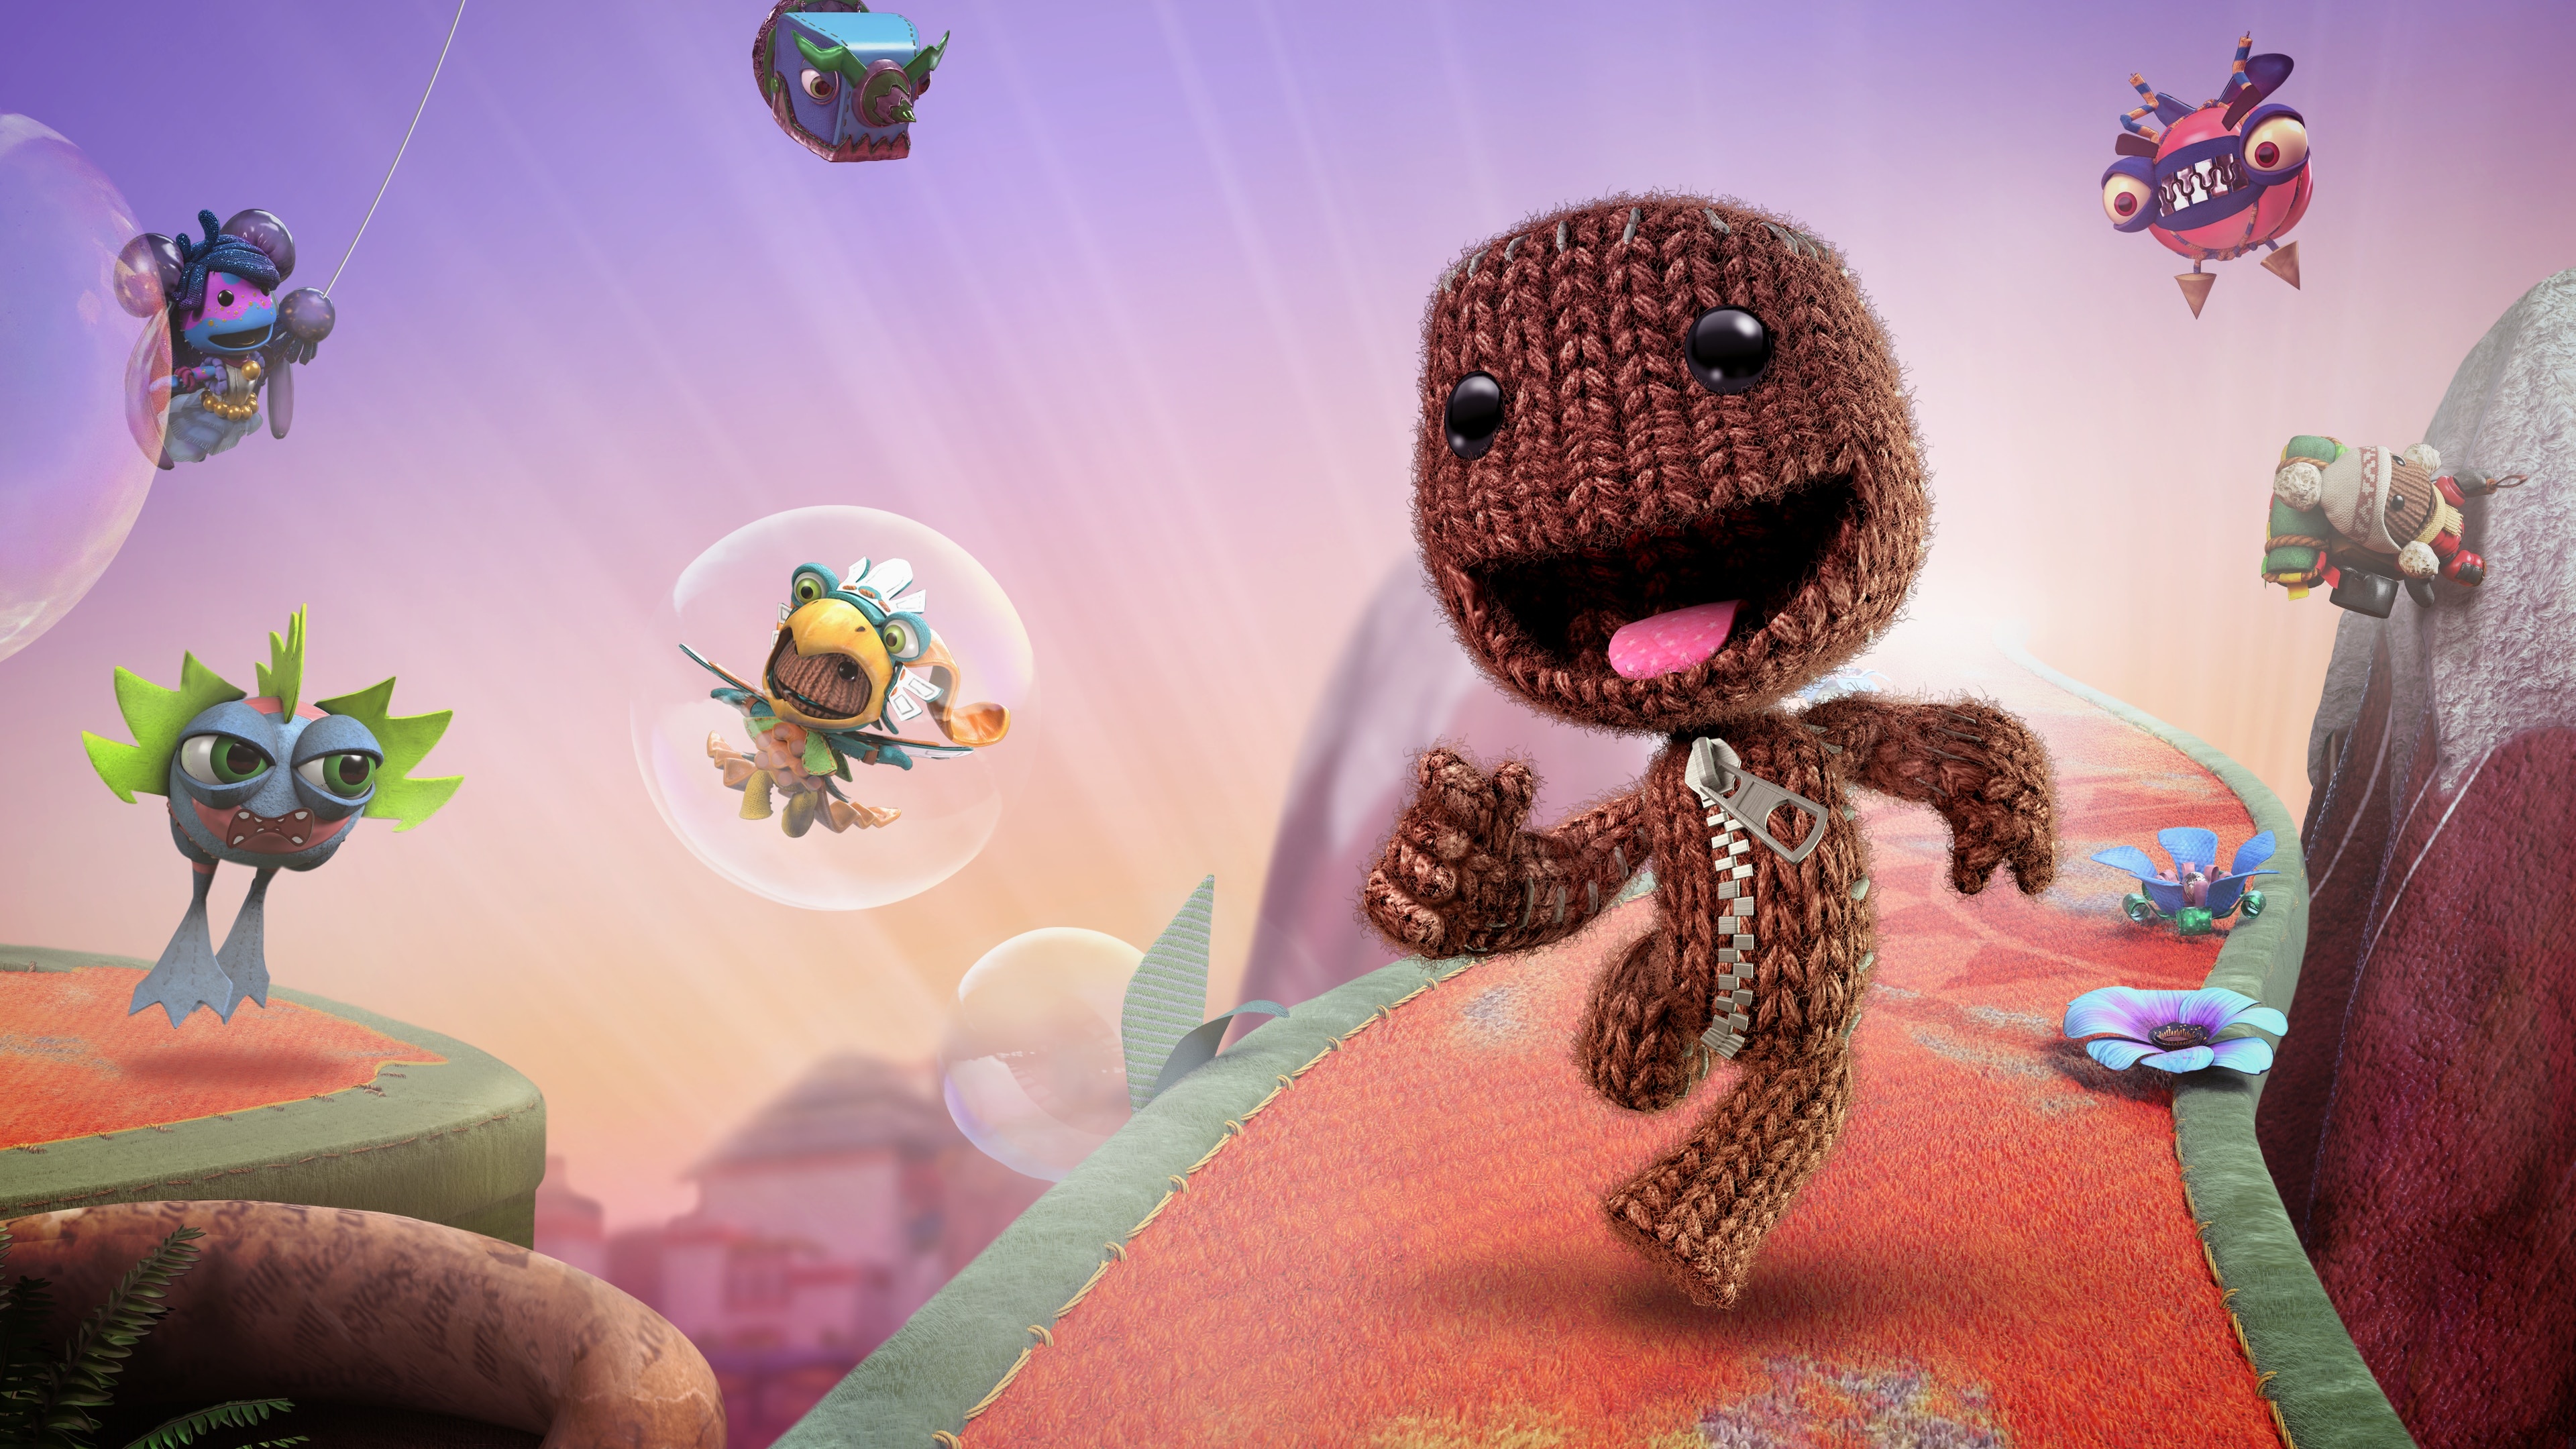 HD wallpaper, Lbp Game, Ps4 And Ps5, Gaming World, Desktop 4K Lbp Game Wallpaper, 3840X2160 4K Desktop